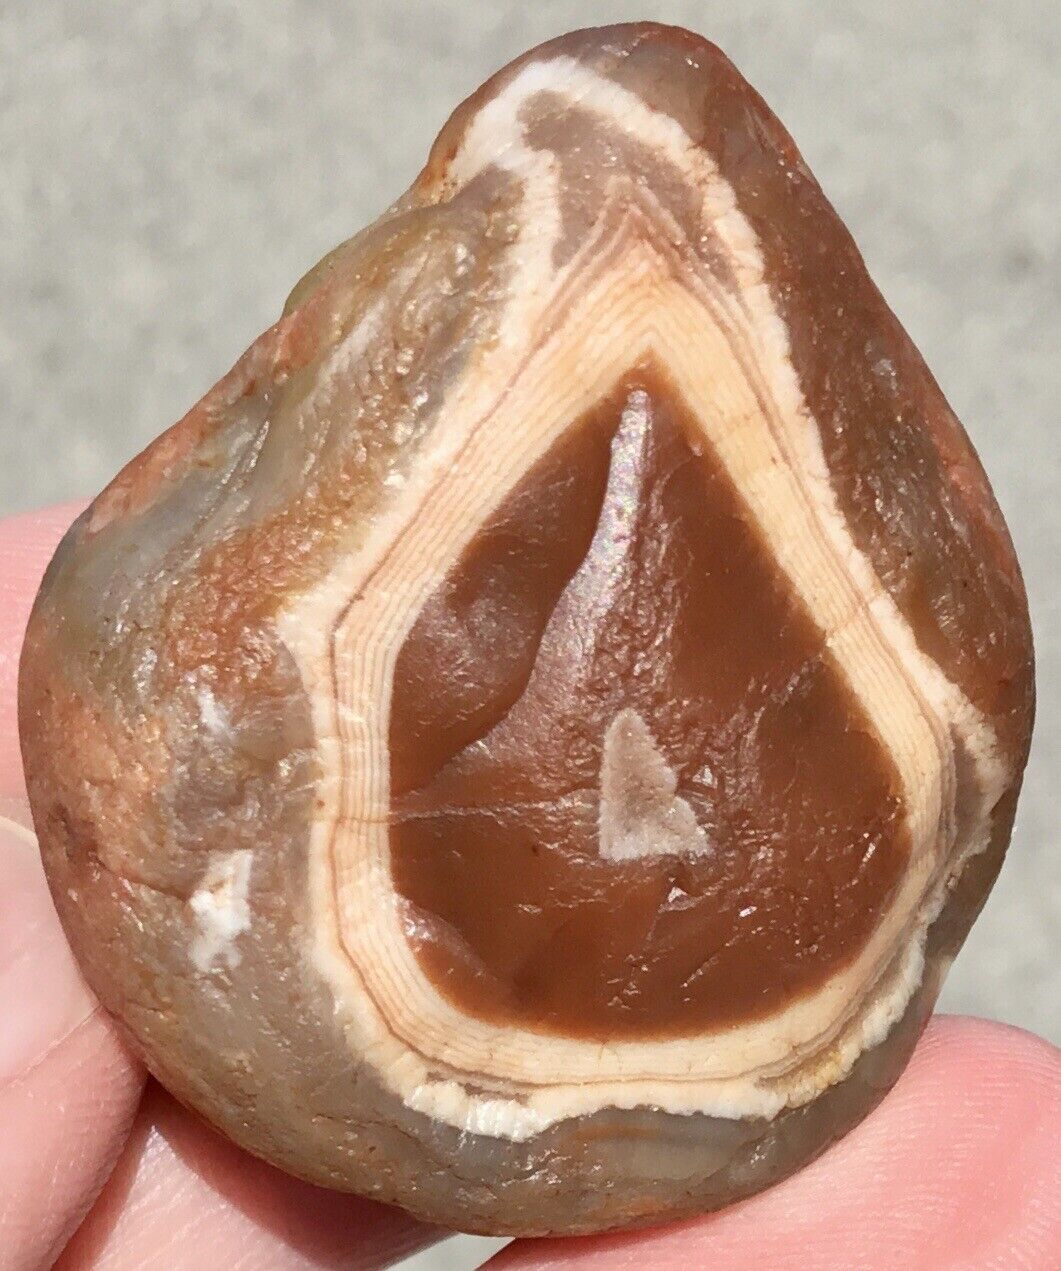 2.5 Oz Lake Superior Agate TOP SHELF High Contrast Two Faced Bold Banding Lsa